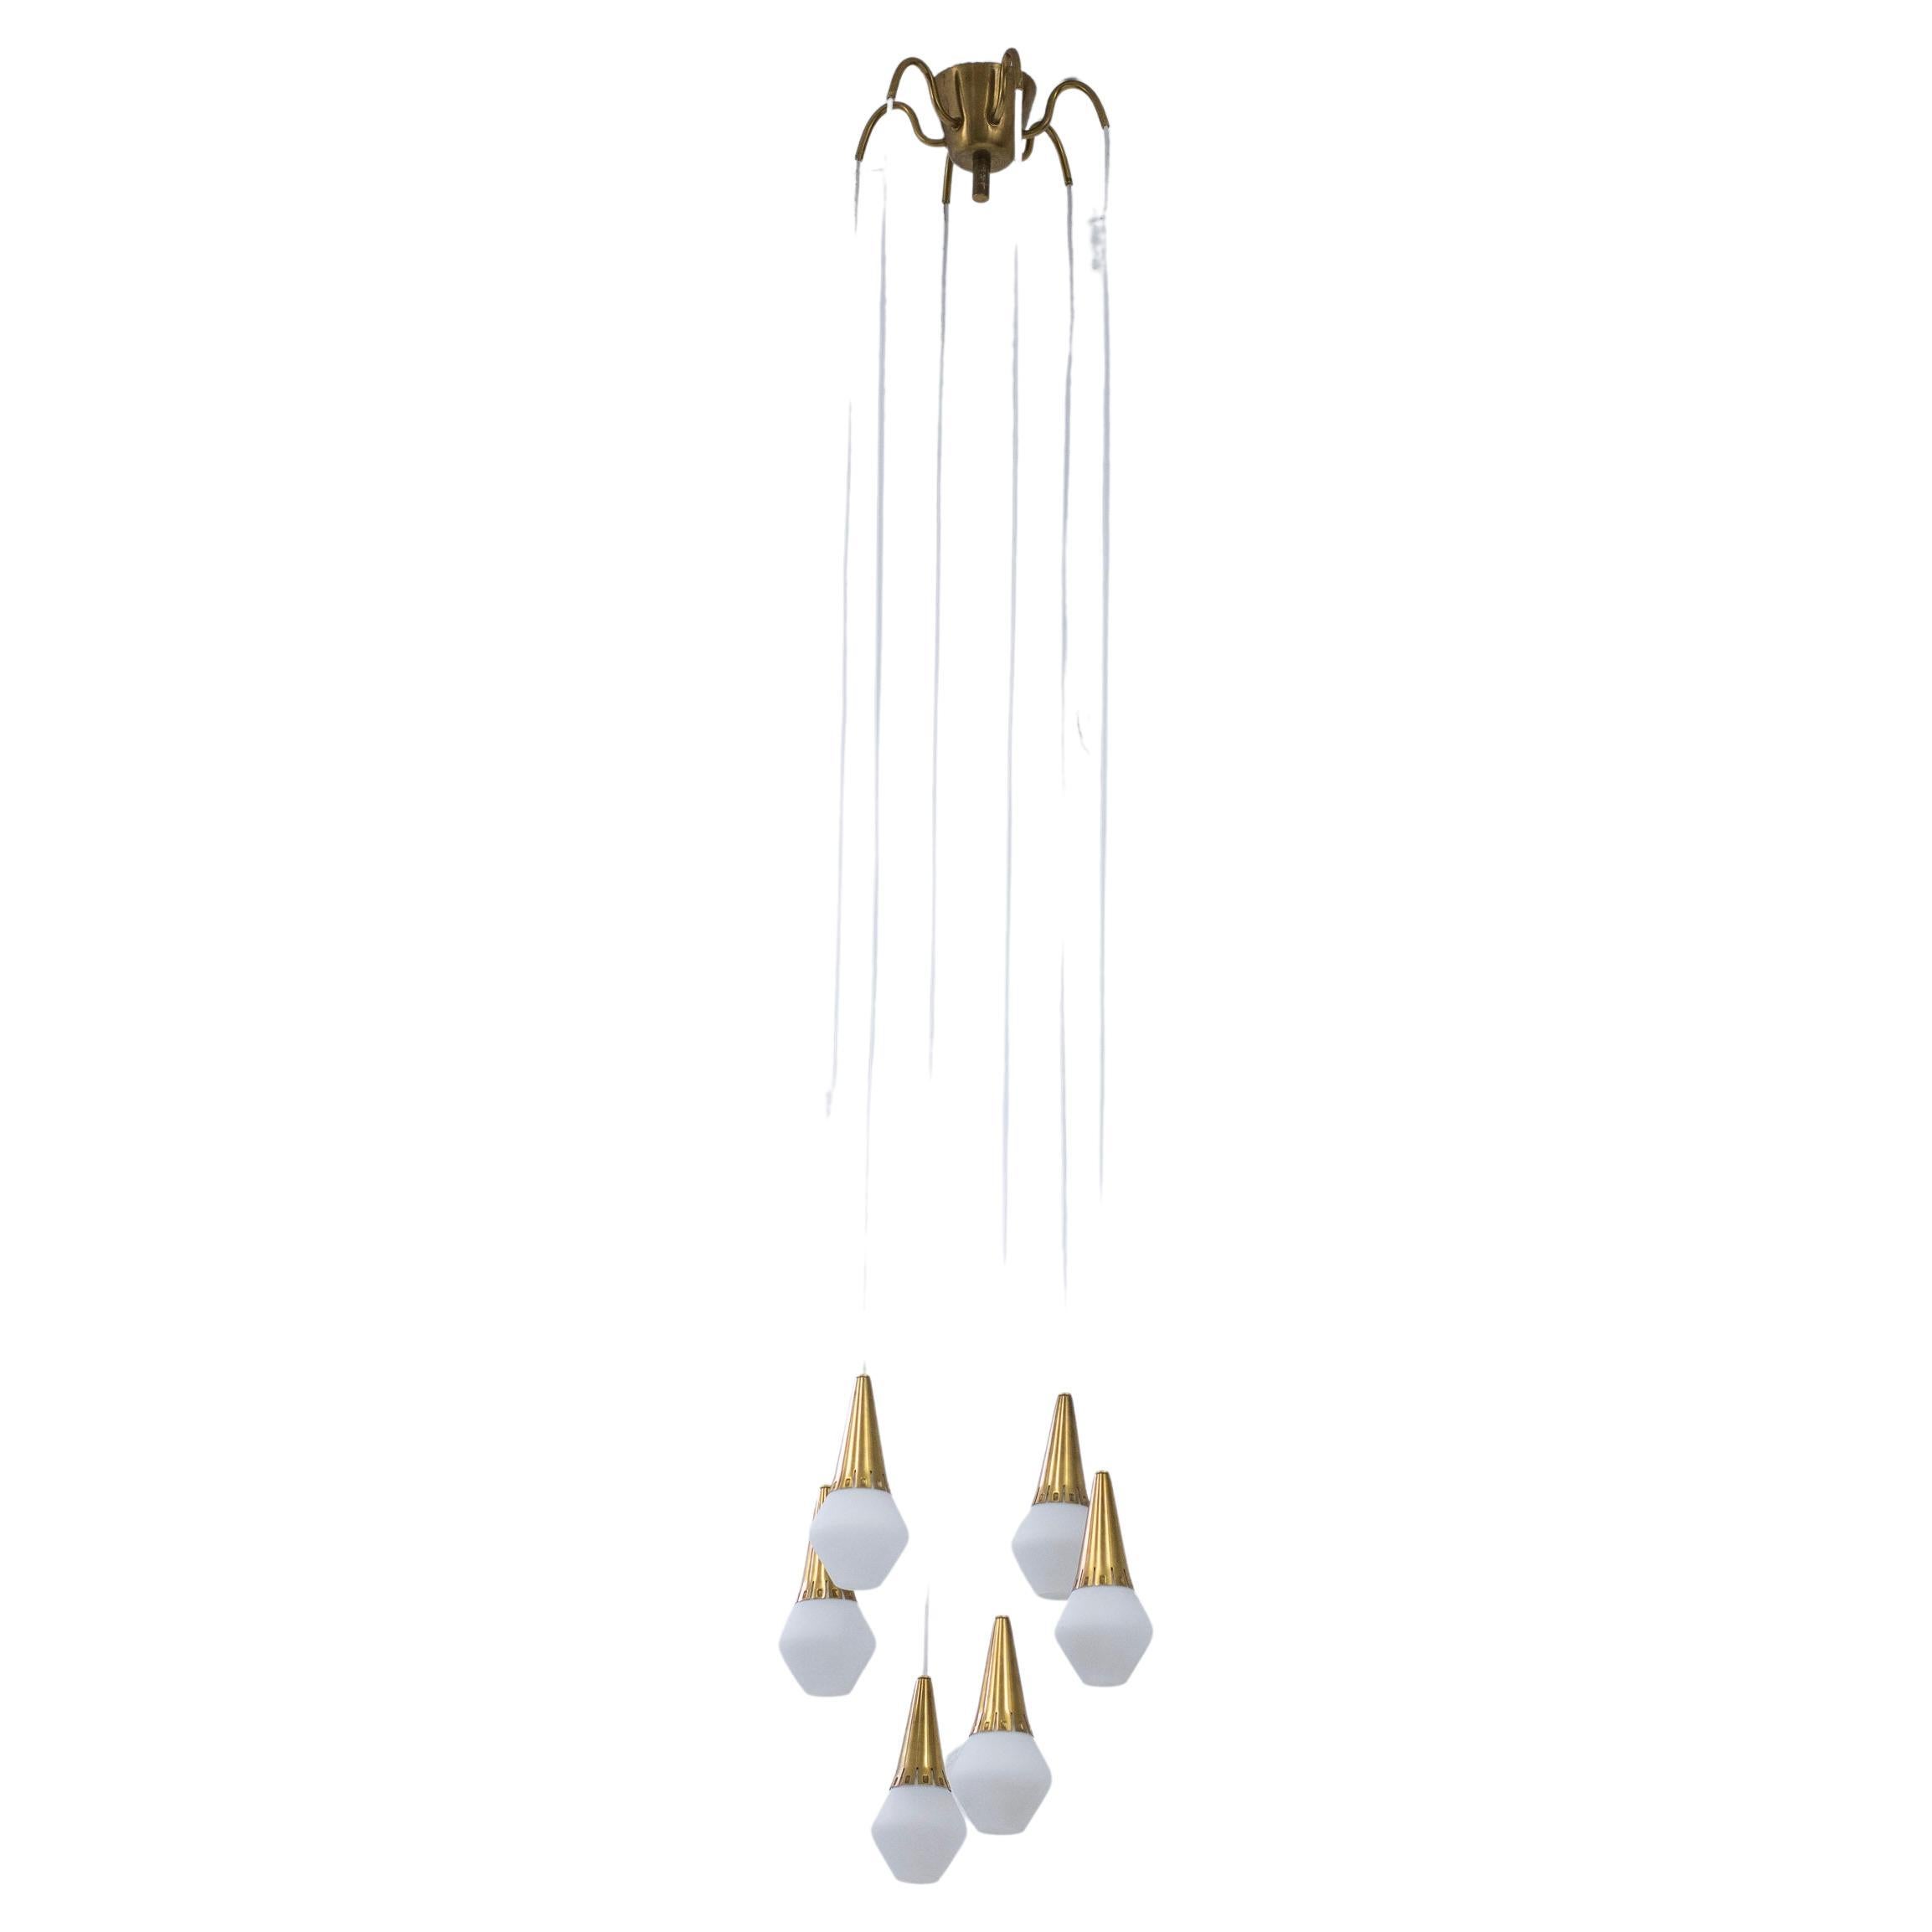 Ceiling Pendant in Brass and Opal Glass by Harald Notini for Böhlmarks, 1950s For Sale